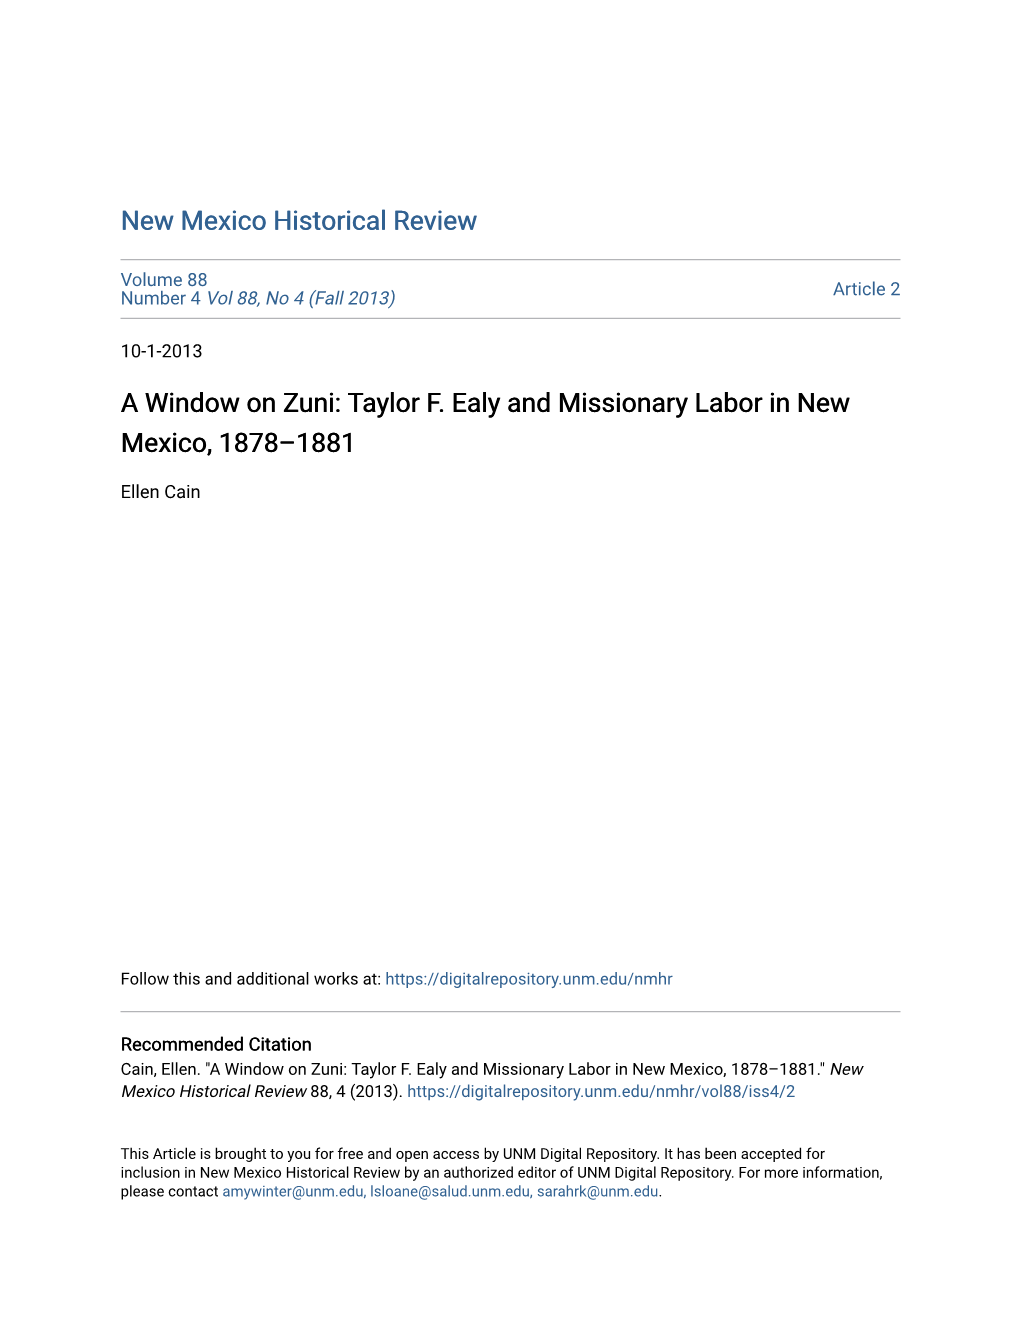 A Window on Zuni: Taylor F. Ealy and Missionary Labor in New Mexico, 1878–1881